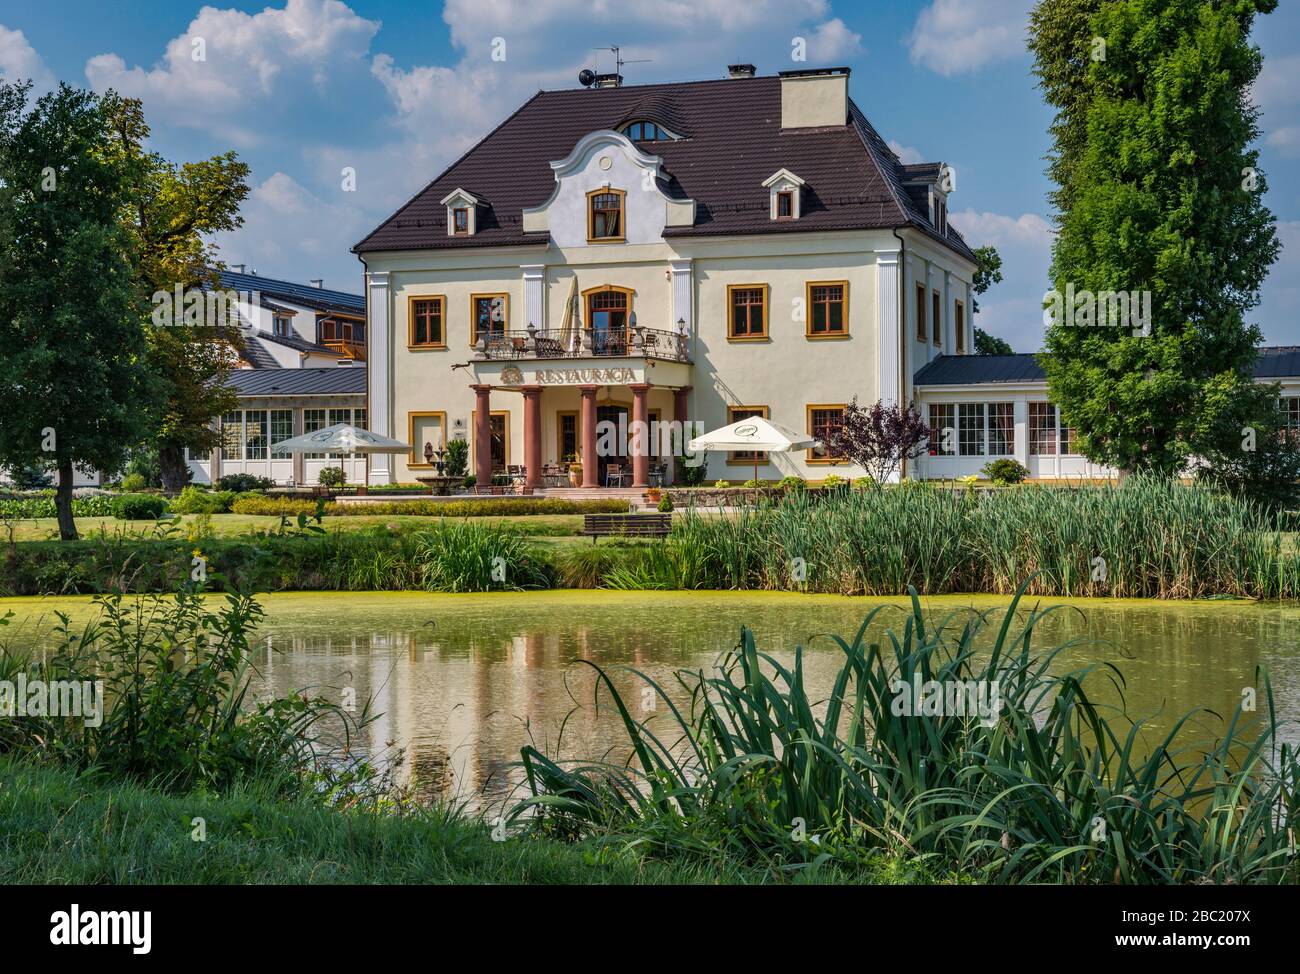 Palace over Water, 1787, hotel in Staniszow, Jelenia Gora Valley Culture Park (Valley of Palaces), Lower Silesia, Poland Stock Photo